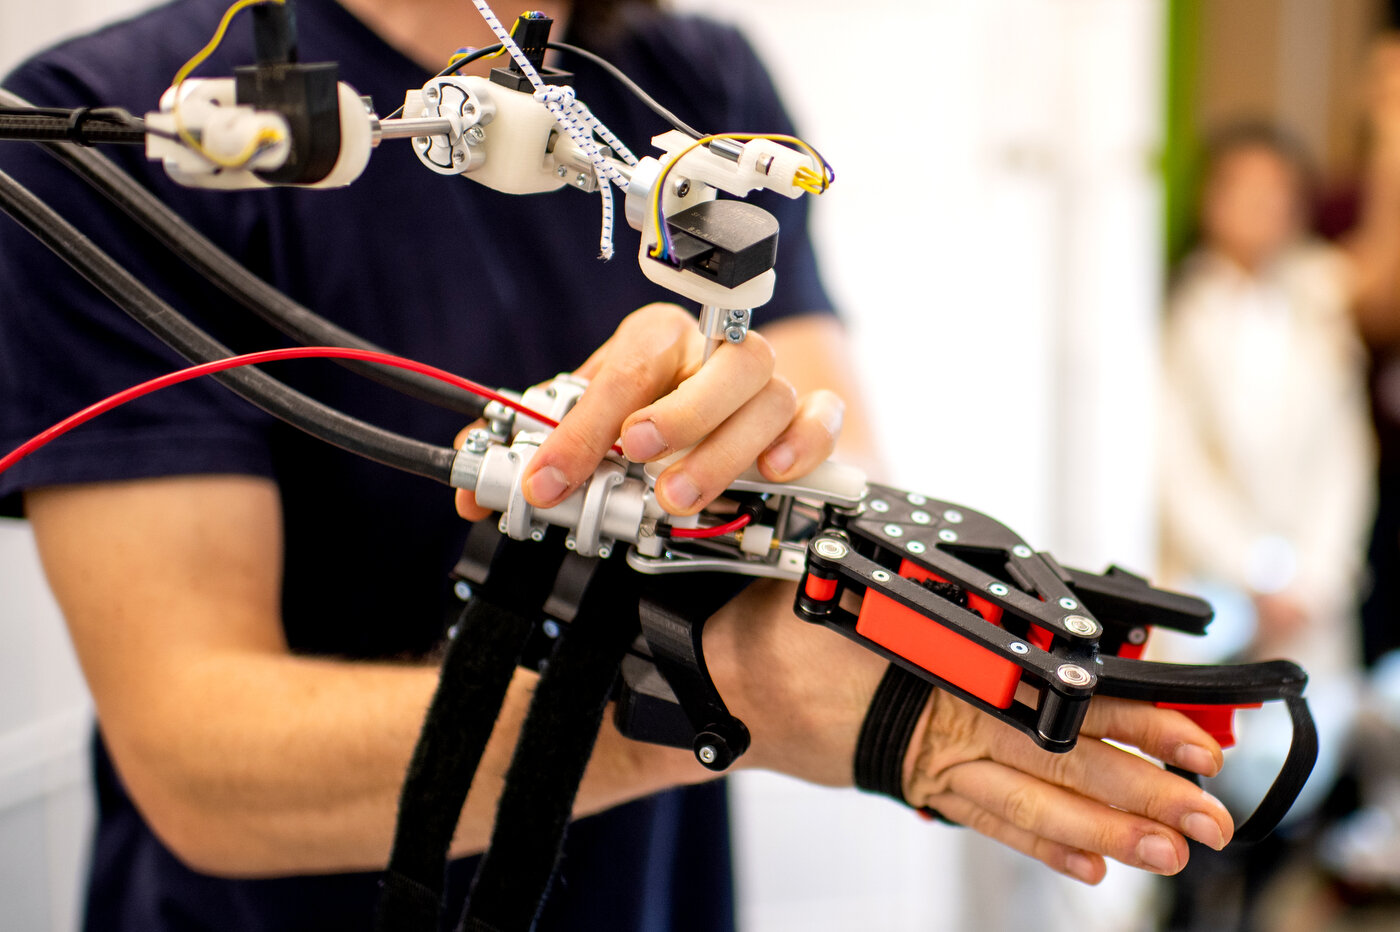 Nimble robotic arms that perform delicate surgery may be one step closer to reality